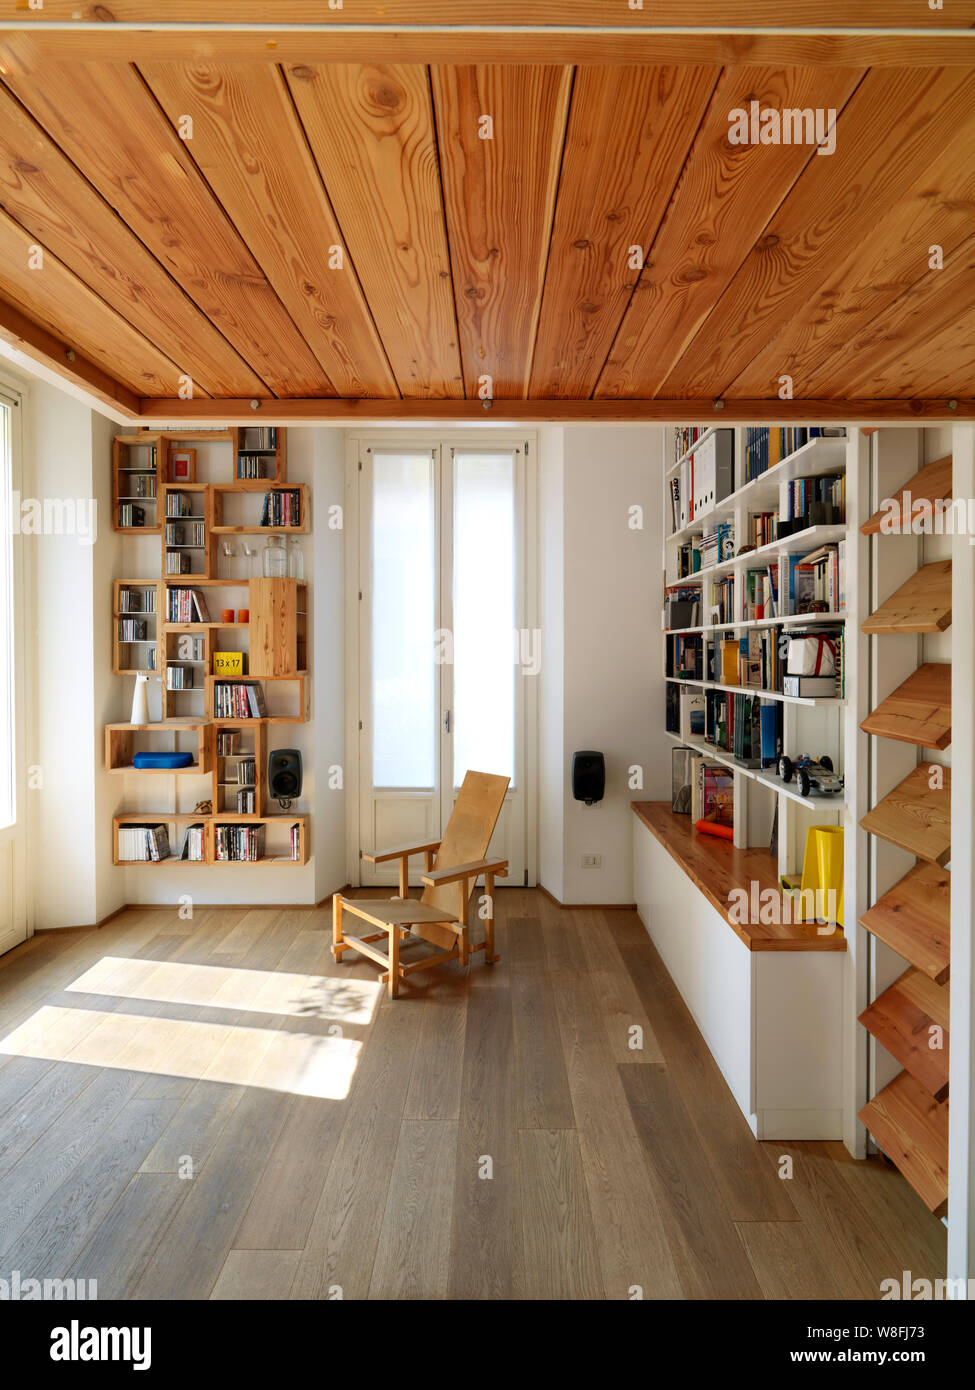 interior shot of a living room with wooden floor and bookcase Stock Photo